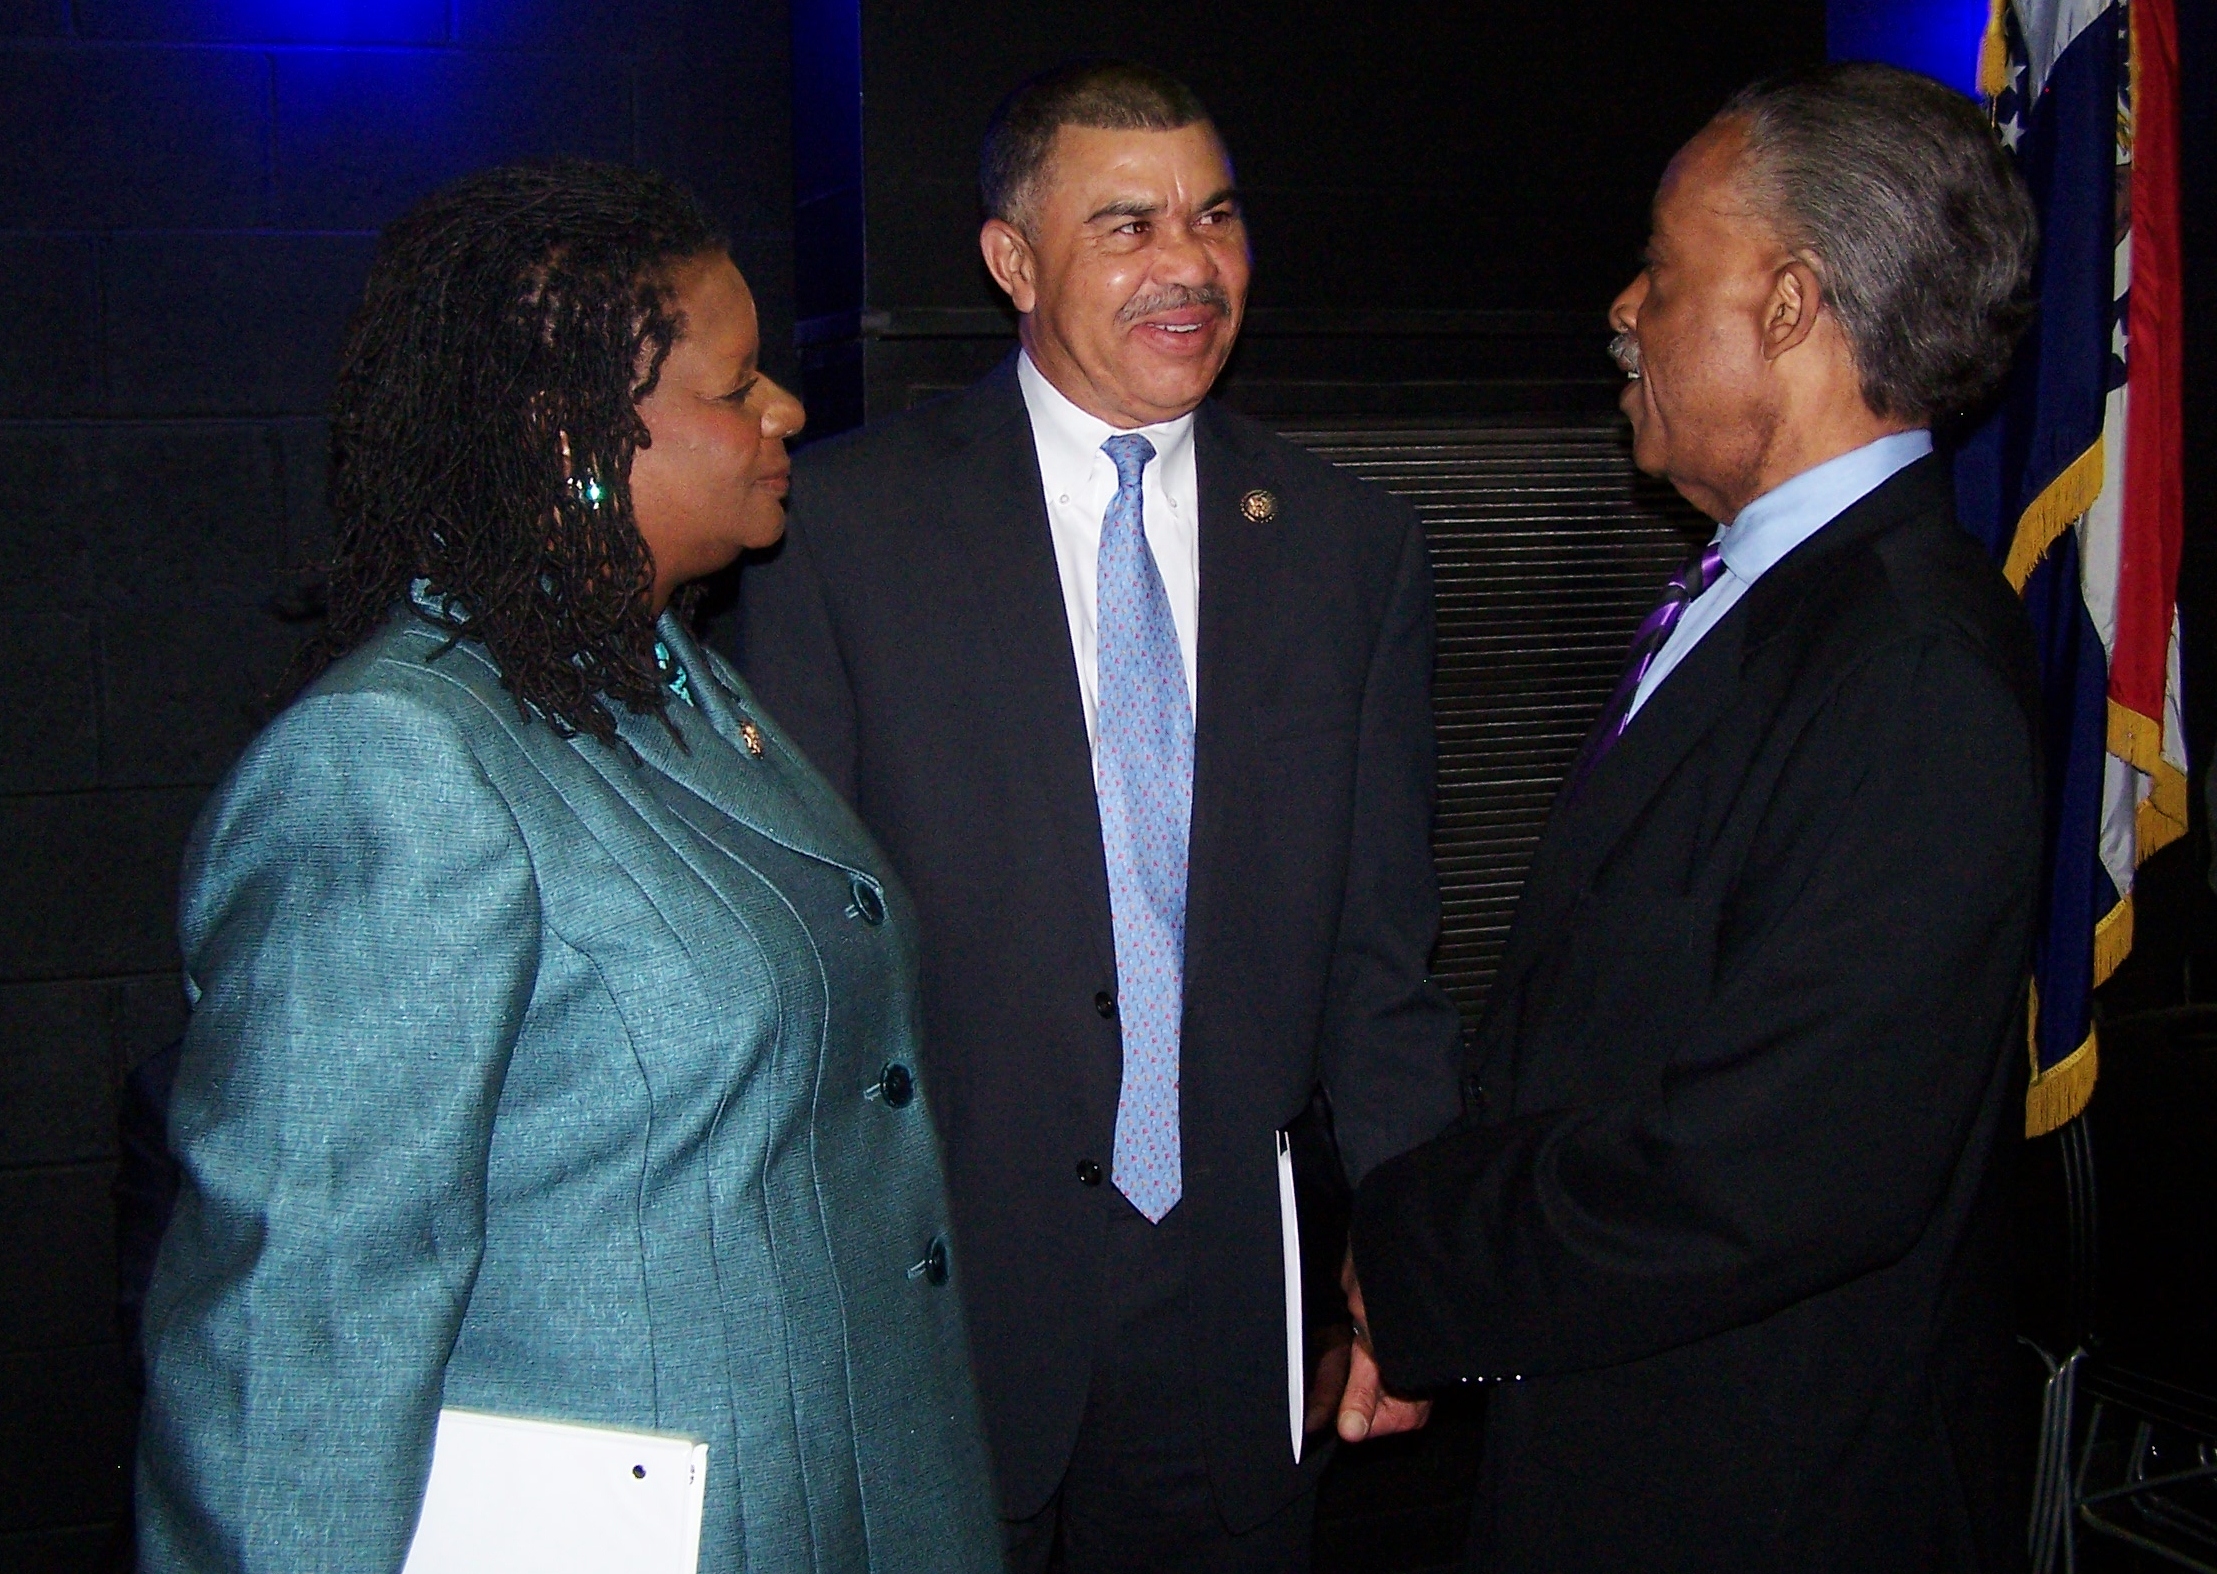 Backstage at the Voting Rights Forum with Congresswoman Gwen Moore, Congressman Lacy Clay and Rev. Al Sharpton